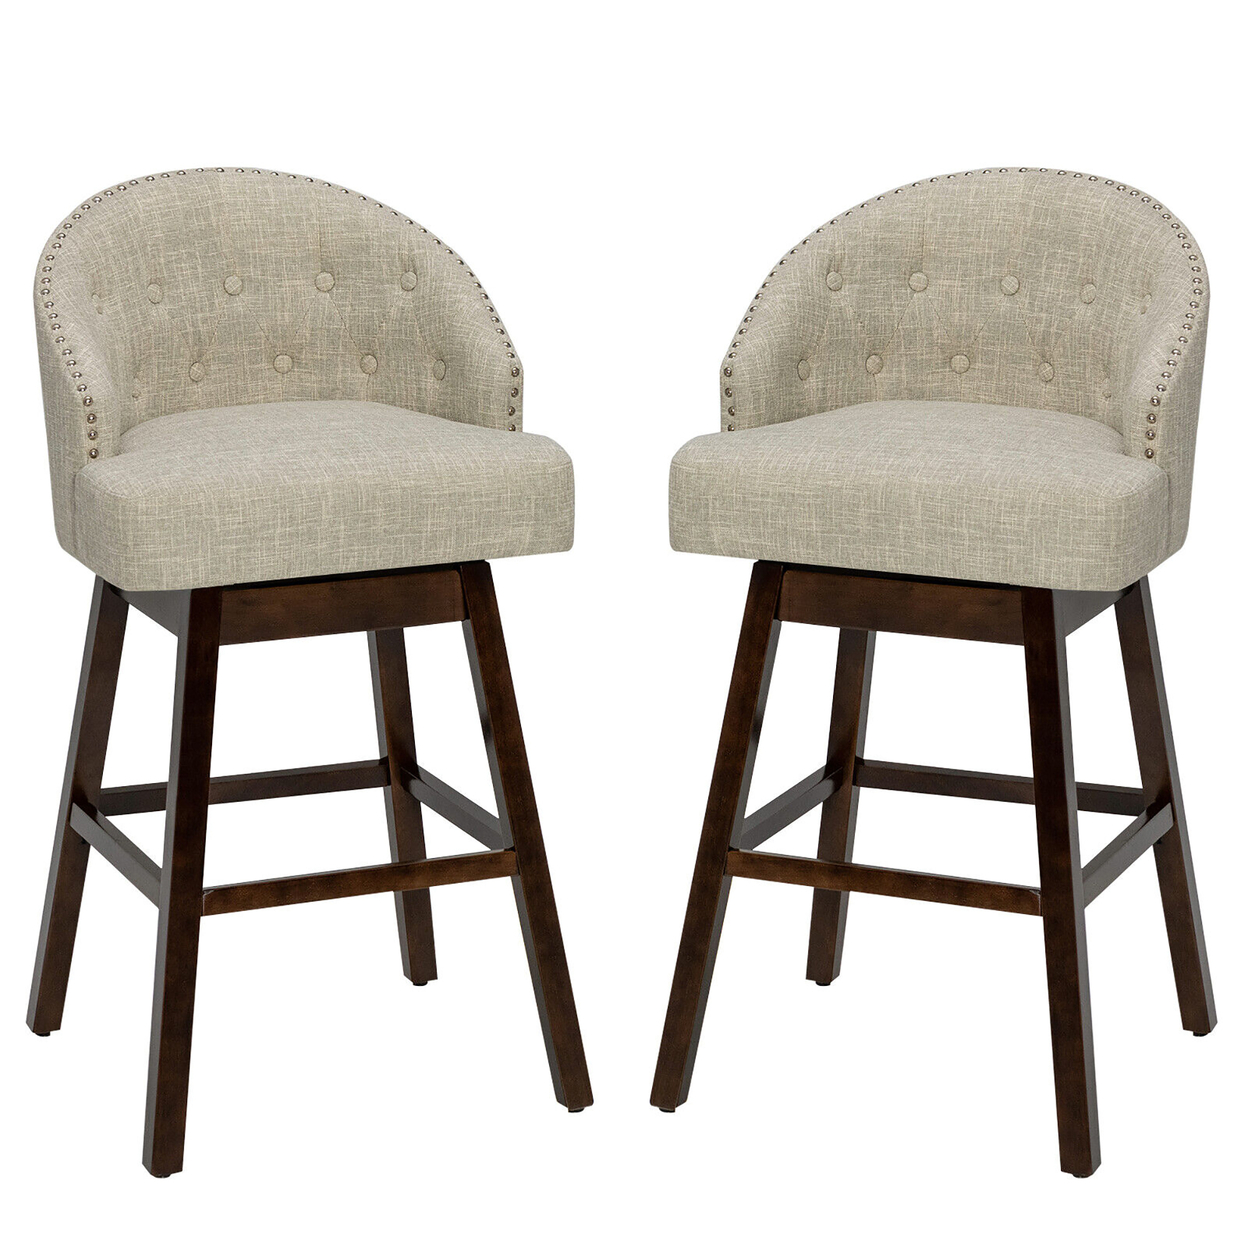 Set Of 2 Swivel Bar Stools Tufted Bar Height Pub Chairs W/ Rubber Wood Legs